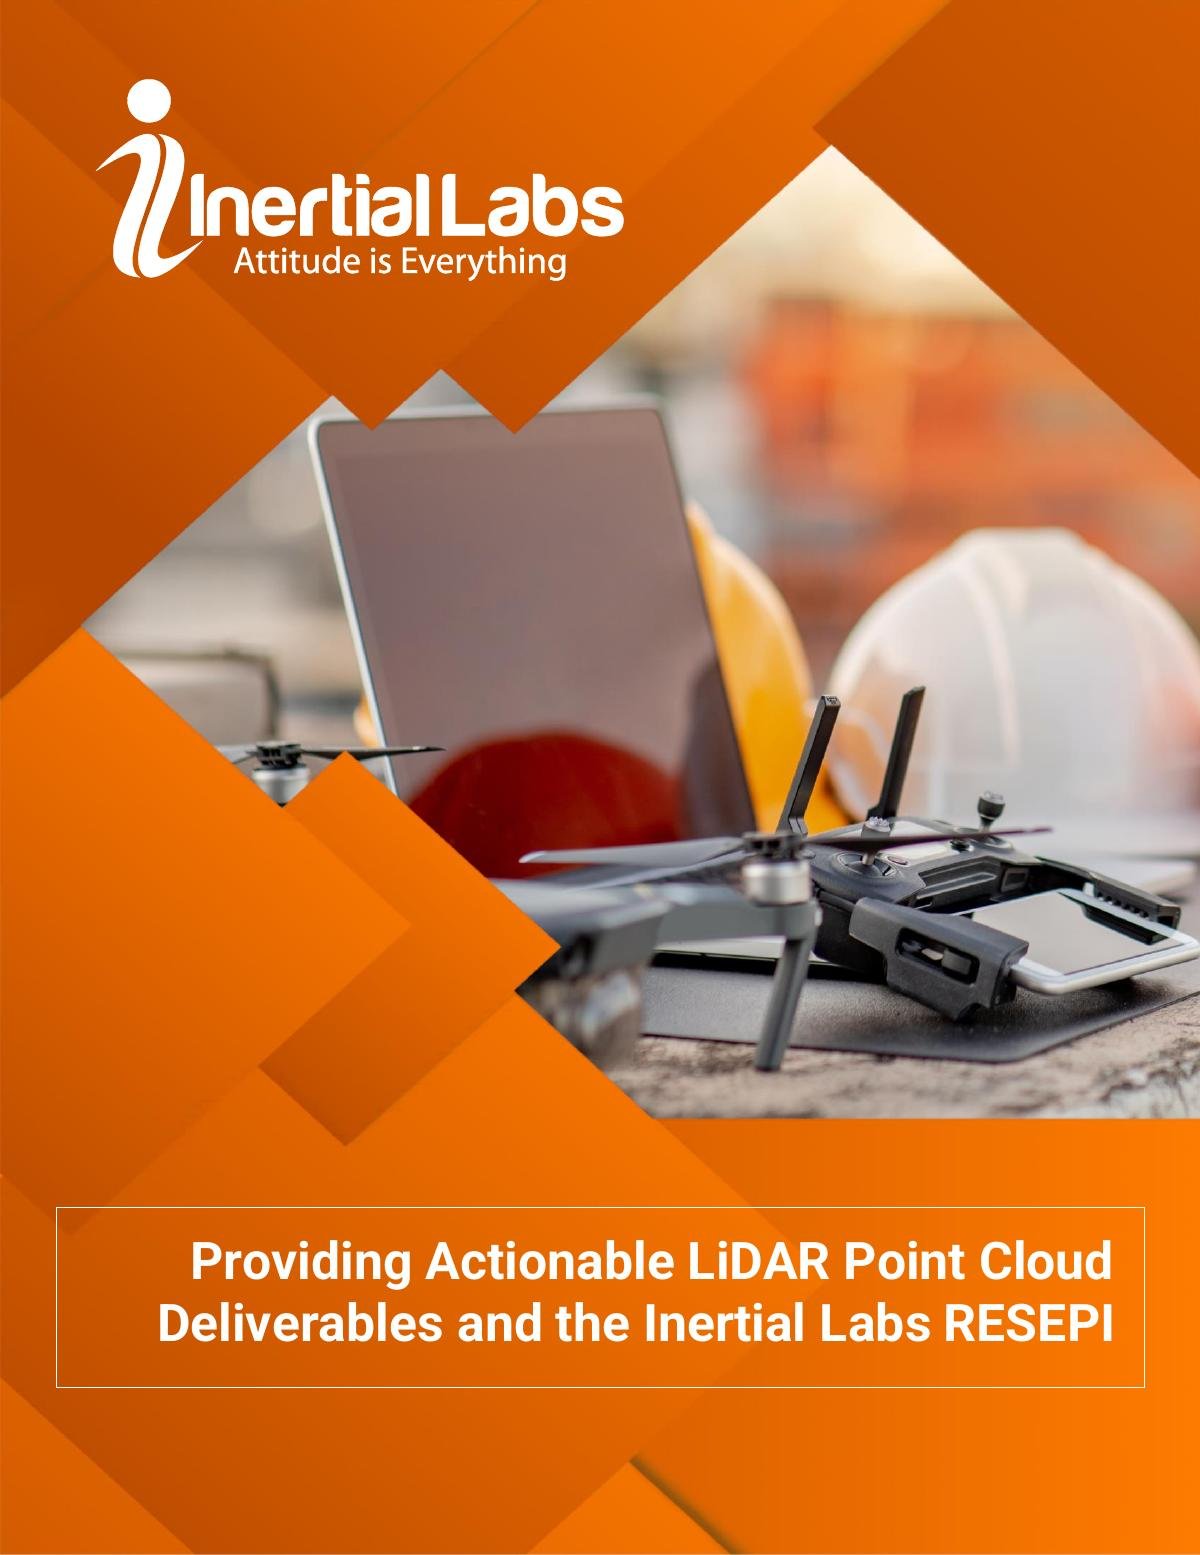 Providing Actionable LiDAR Point Cloud Deliverables and the Inertial Labs RESEPI